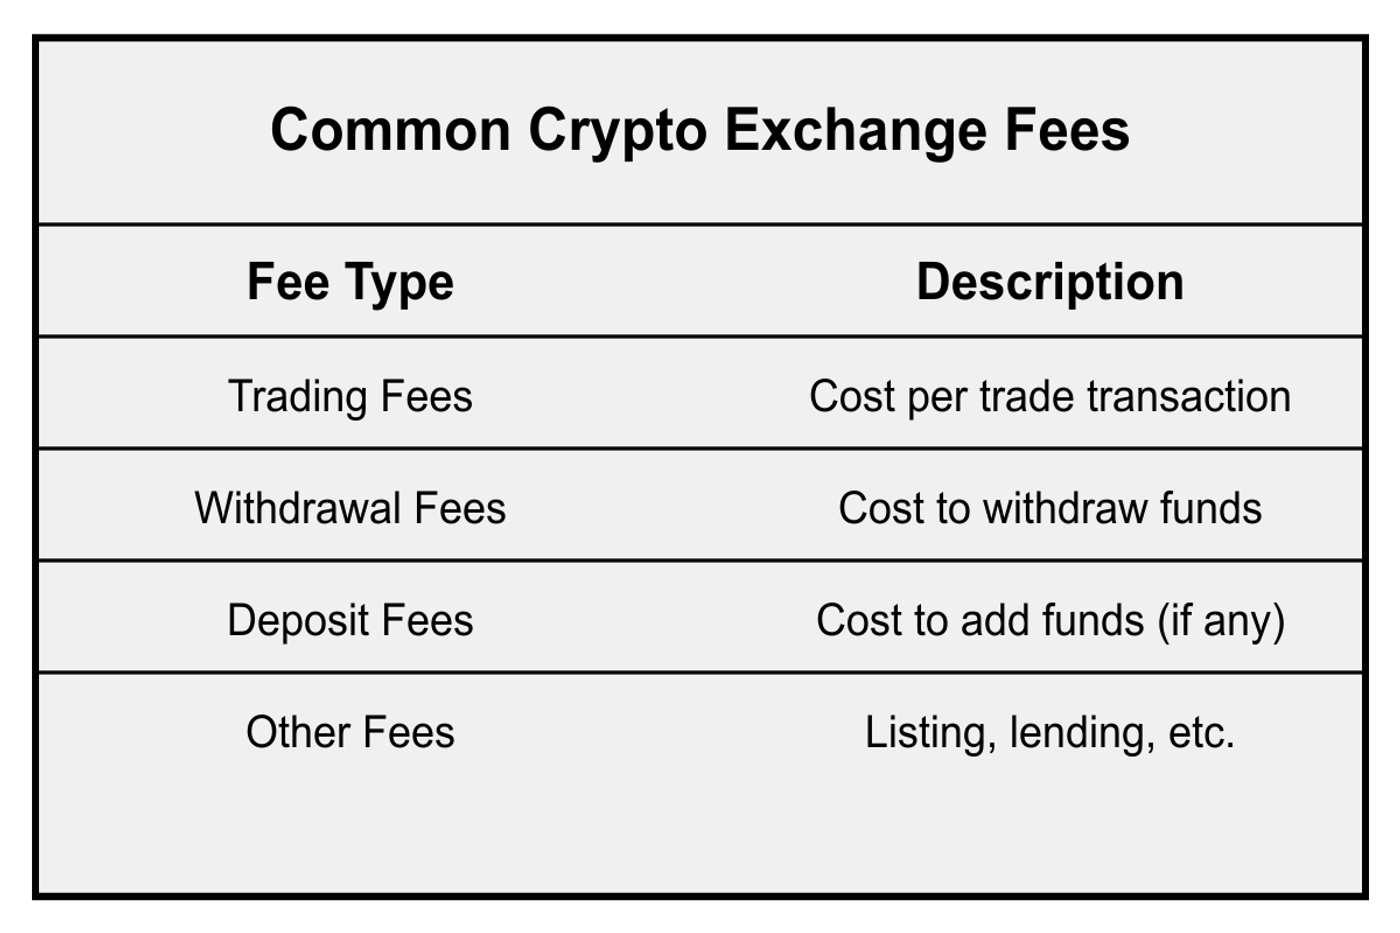 A table titled "Common Crypto Exchange Fees" listing four fee types: Trading Fees (cost per trade transaction), Withdrawal Fees (cost to withdraw funds), Deposit Fees (cost to add funds, if any), and Other Fees (such as listing and lending fees).